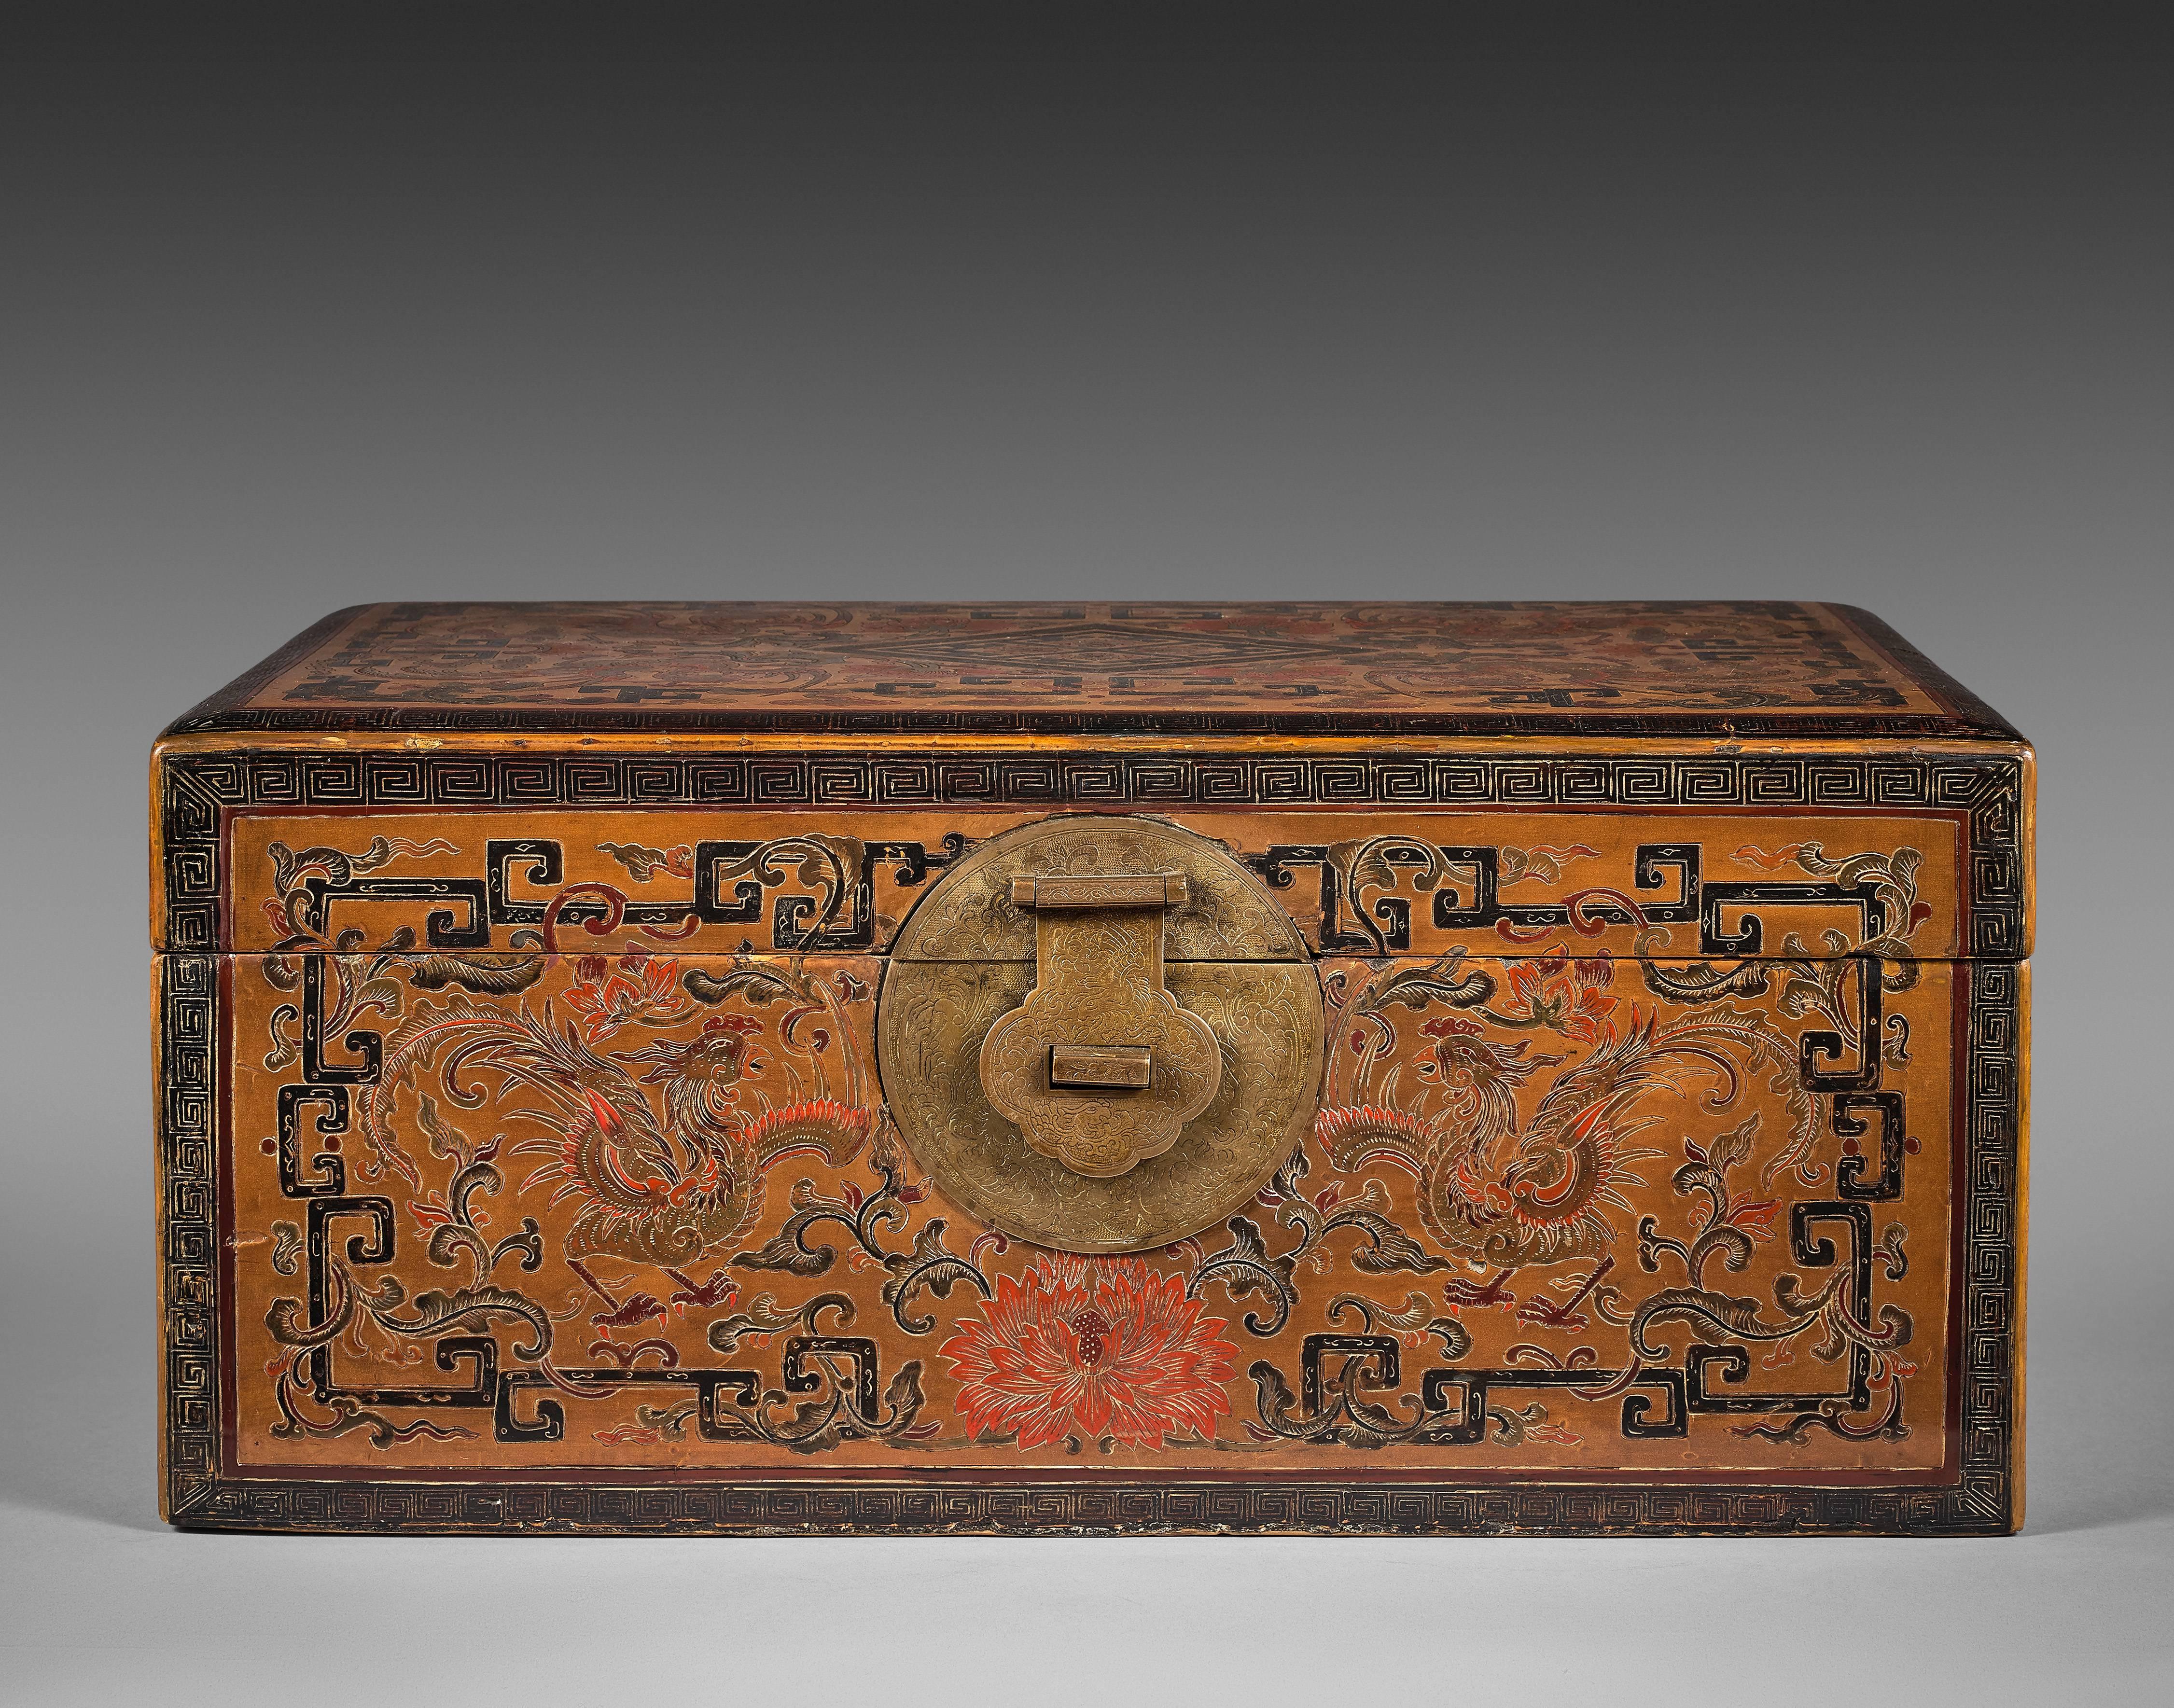 The coffer with an ocher yellow lacquered ground, engraved with phoenix, birds flyng among the clouds, foliage and flowers. The decoration also with keyfrets and stylized kui dragons patterns. The patterns highlighted with red, black, brown and